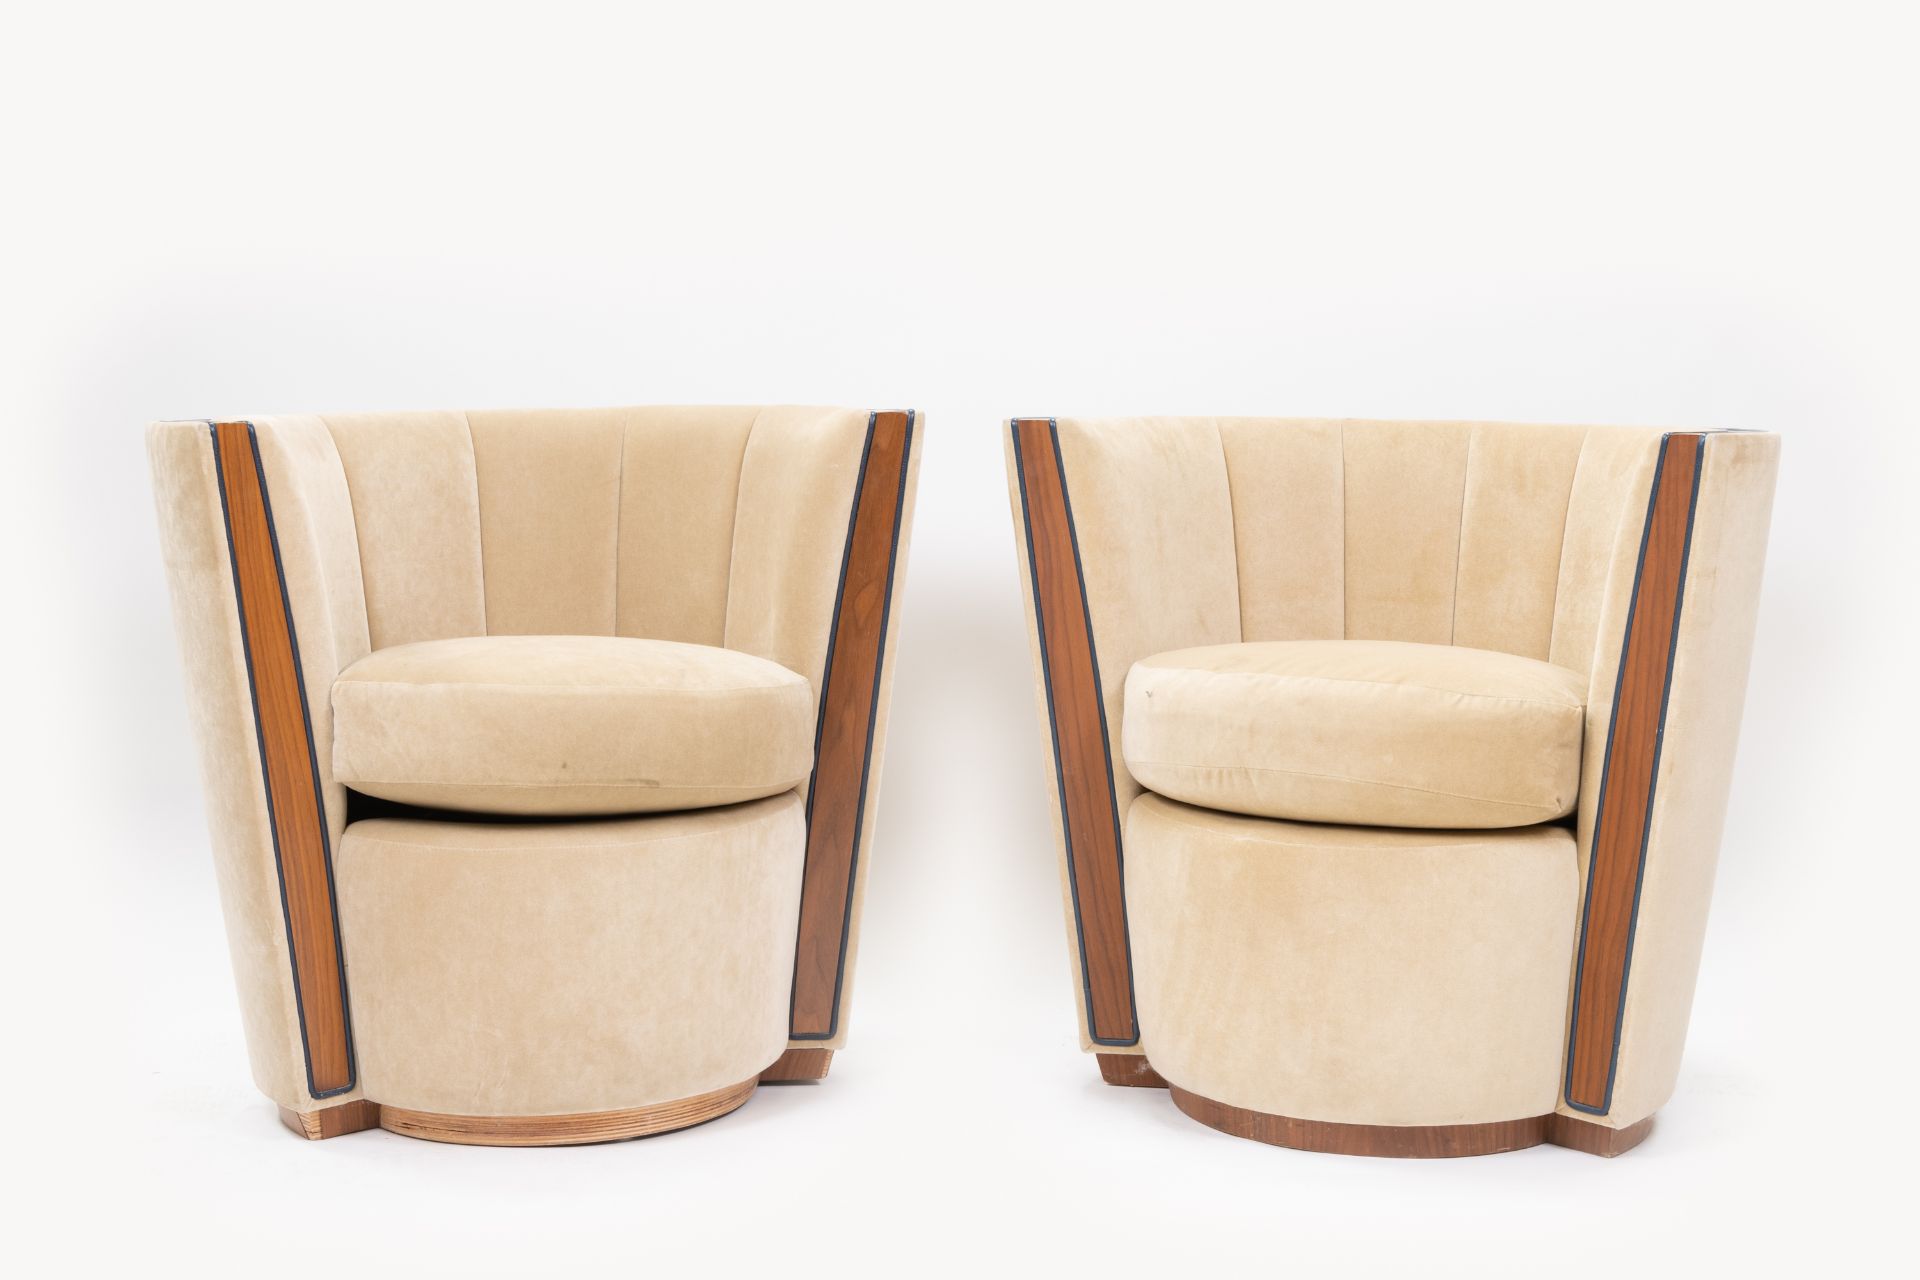 Pair of Bespoke Deco Tub Chairs Made for Claridge's by David Linley - Image 2 of 7